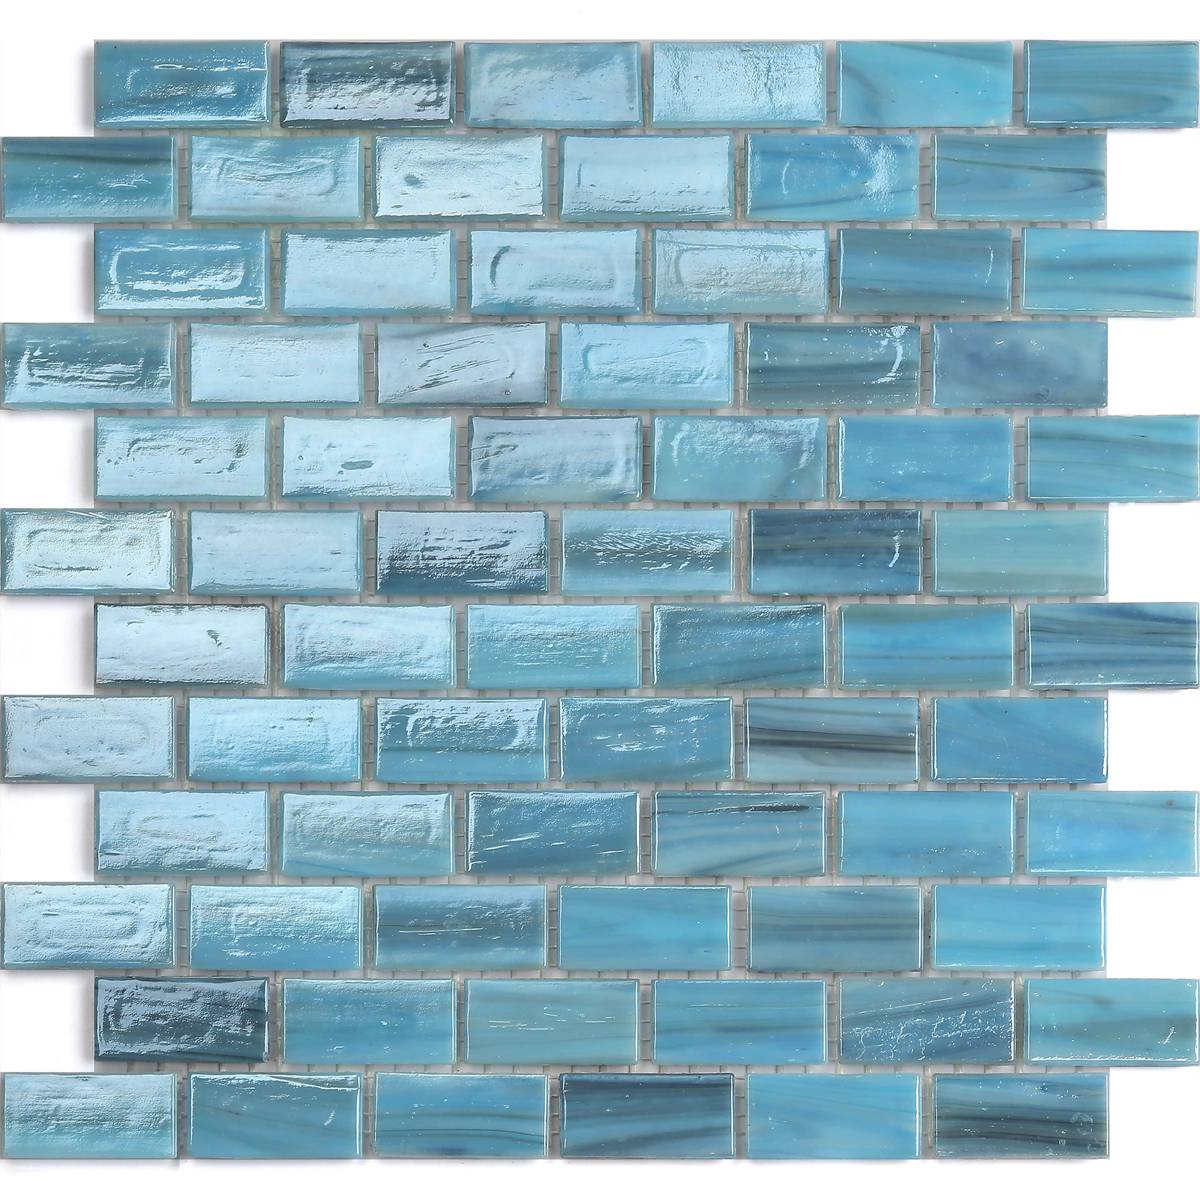 Antique glass mosaic tiles in shower